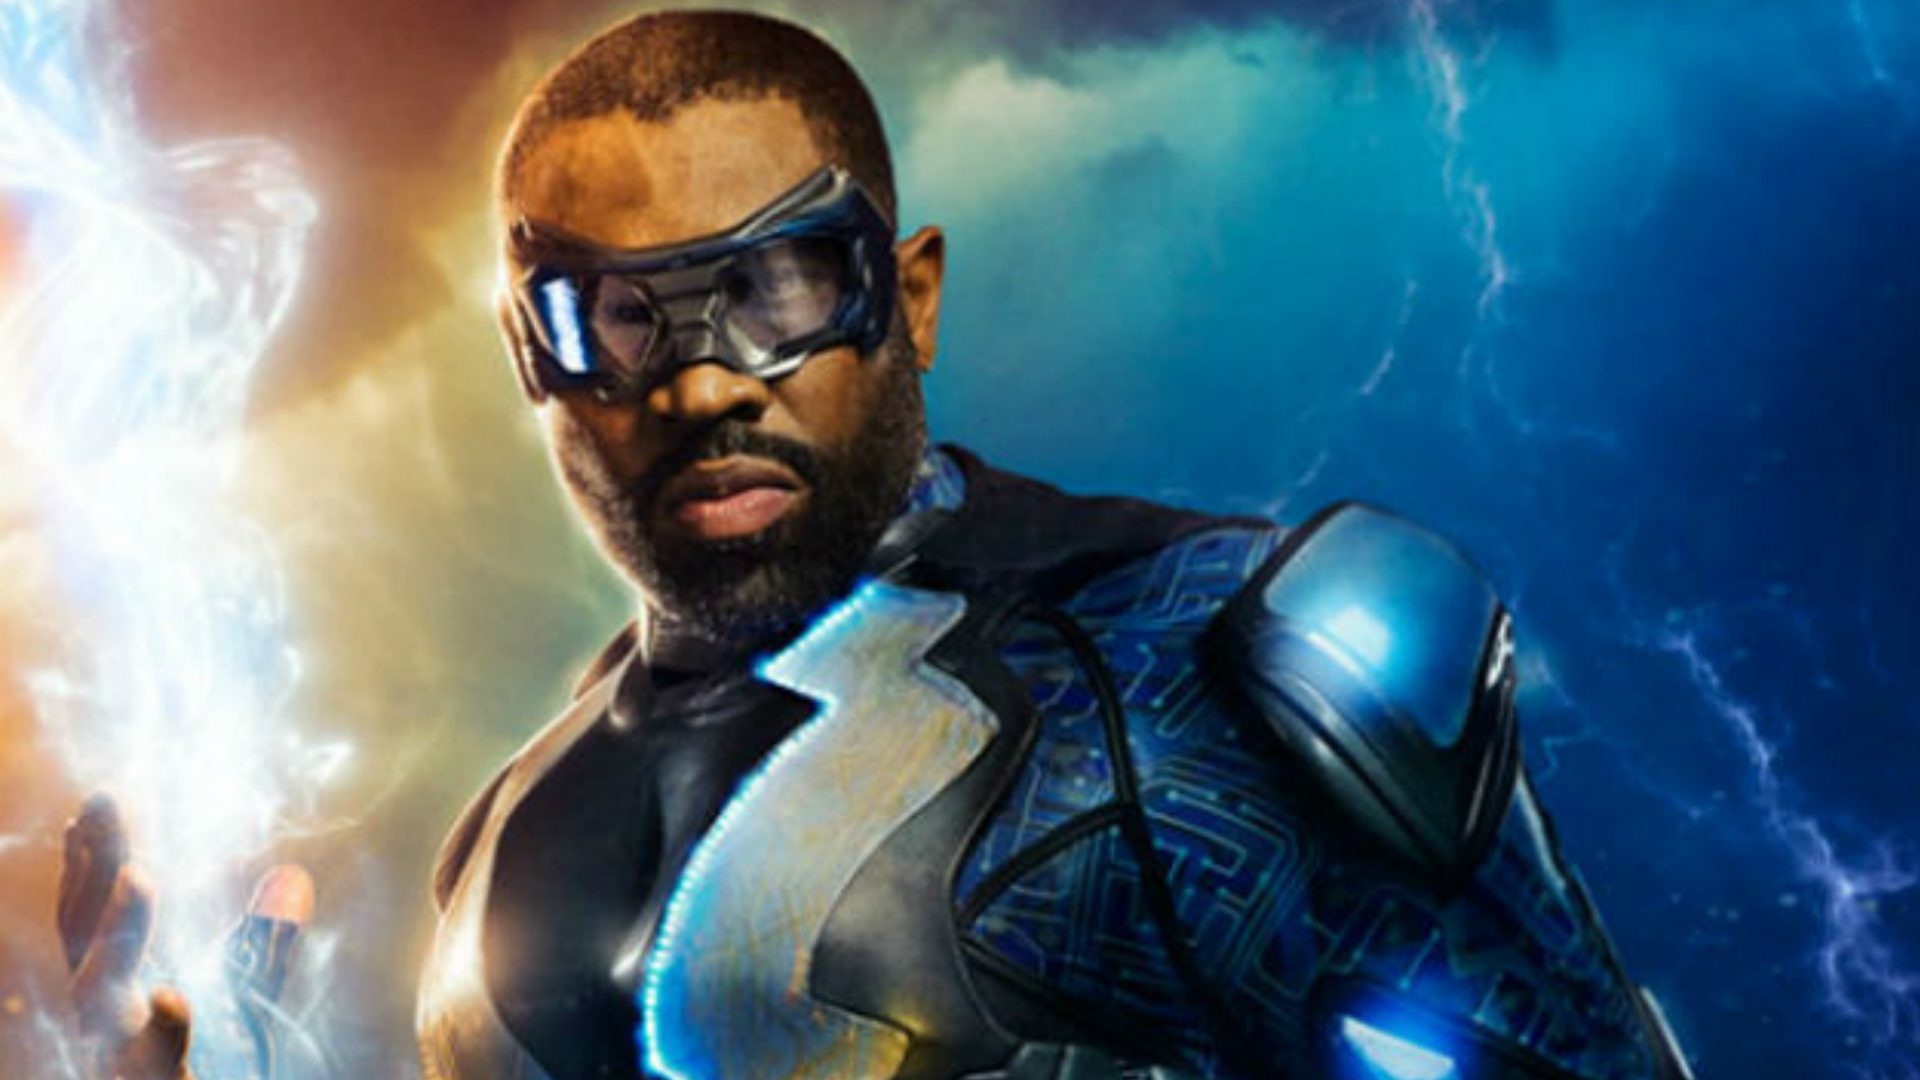 The ‘Black Lightning’ TV pilot shows off its first official image